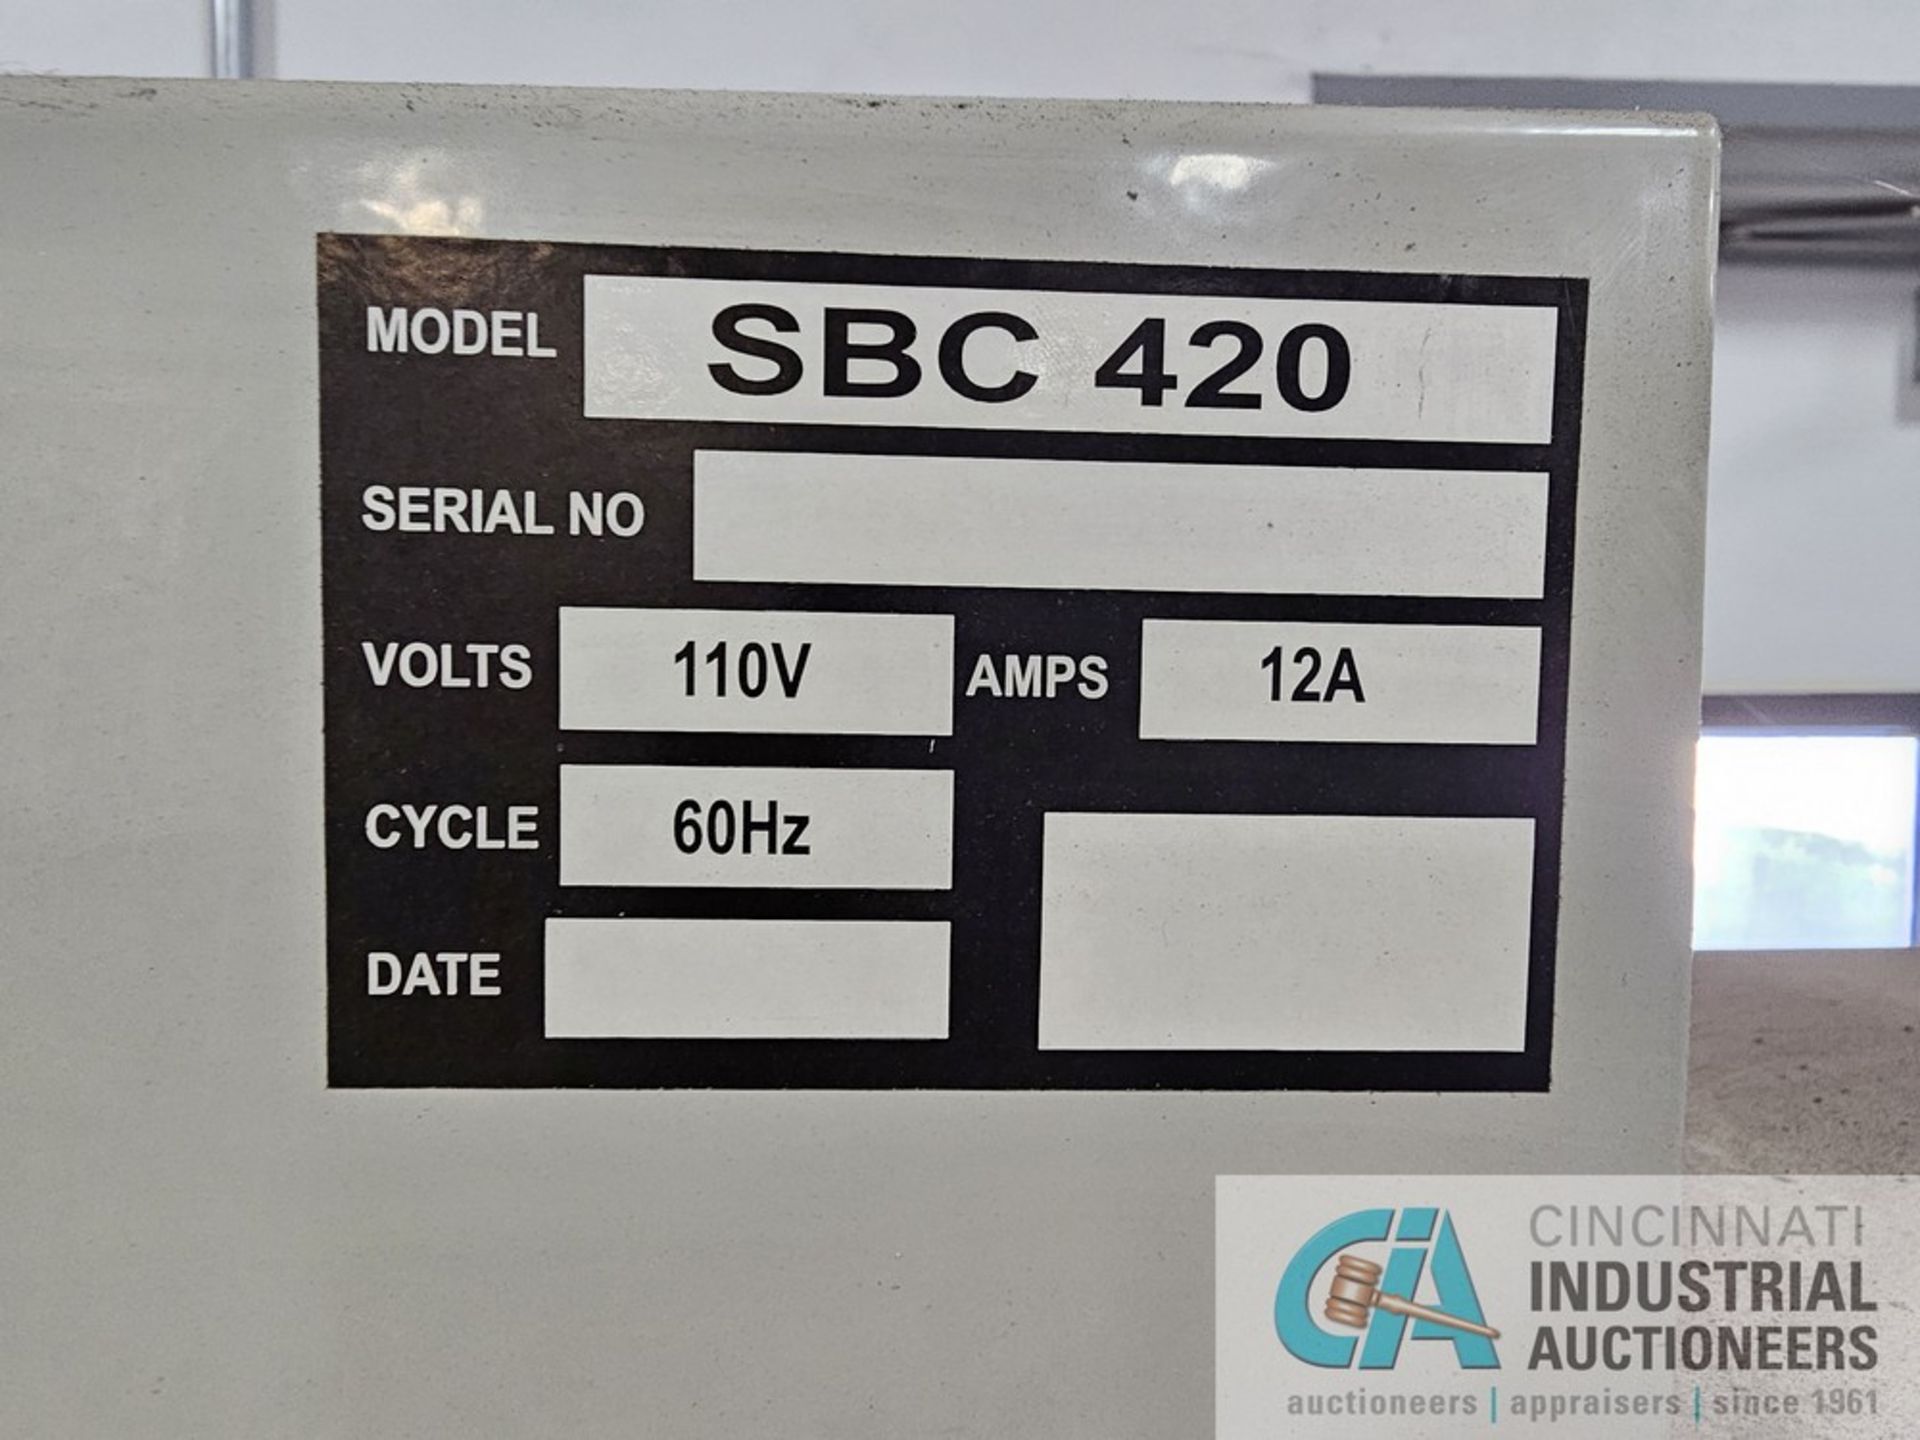 SBC420 ABRASIVE BLAST CABINET, 24" X 48", ATTACHED DUST COLLECTOR - Image 6 of 7